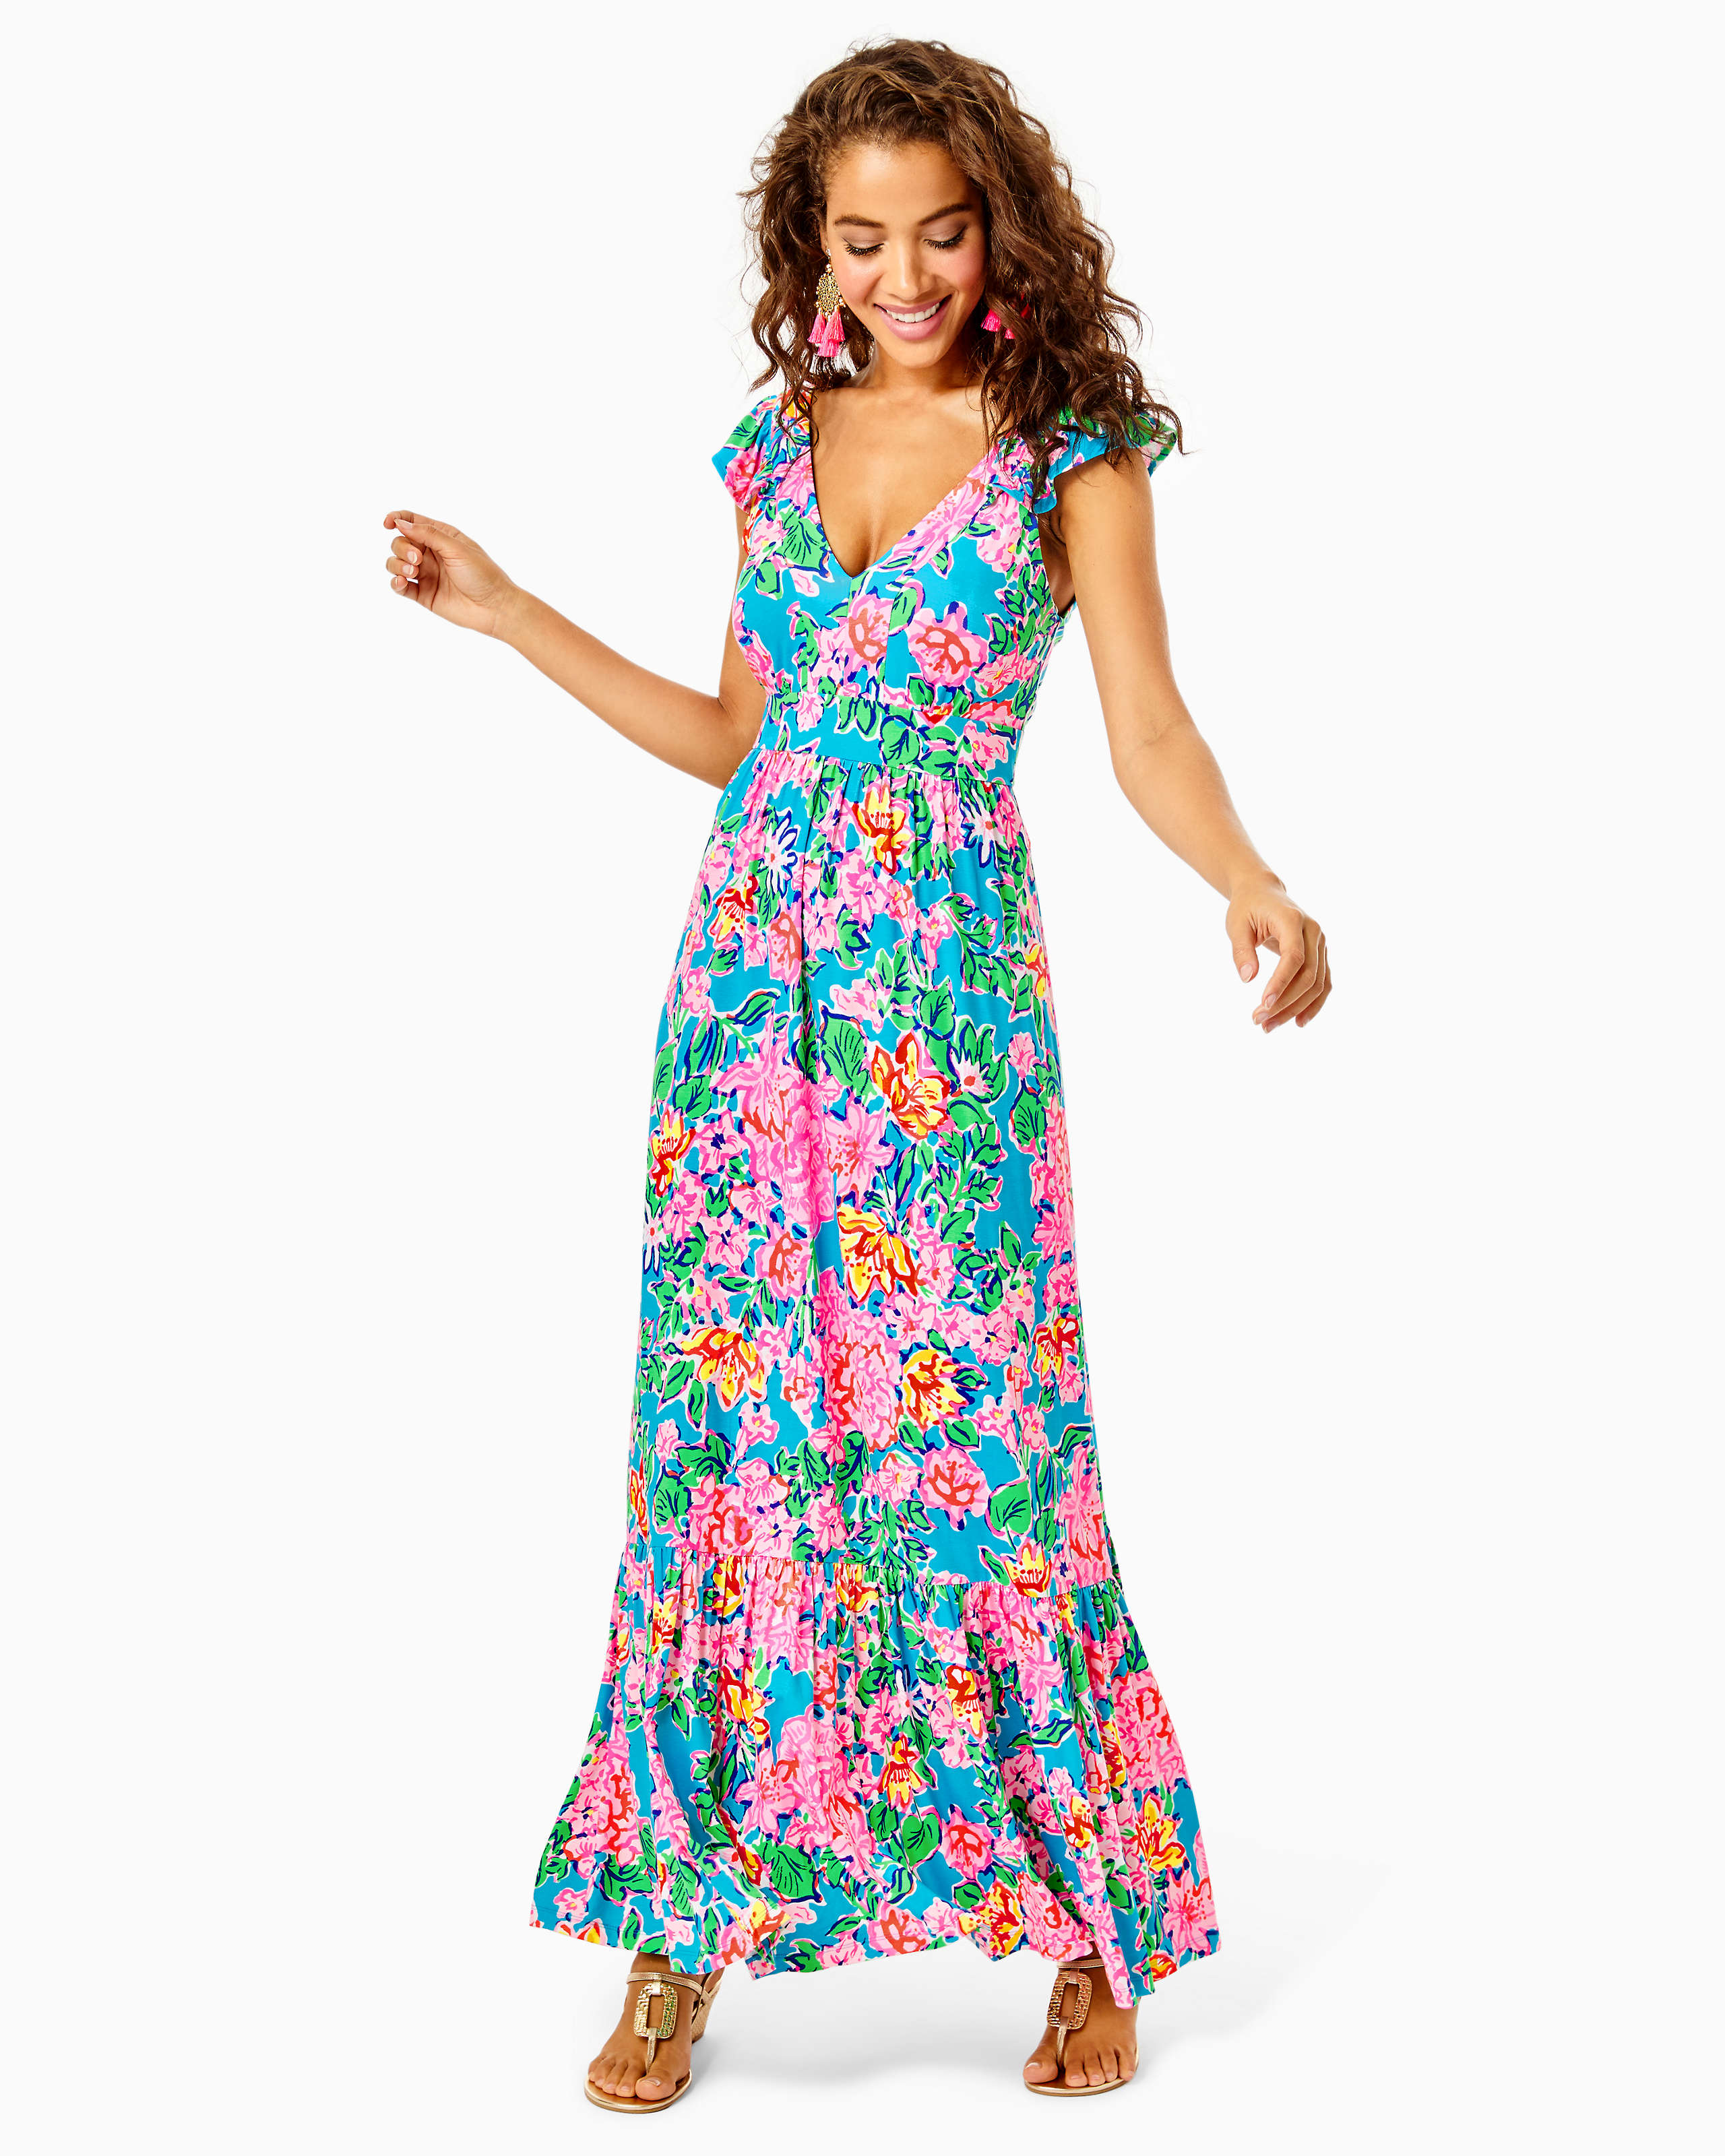 Lilly Pulitzer Wedding Guest Dress for West Palm Beach Florida